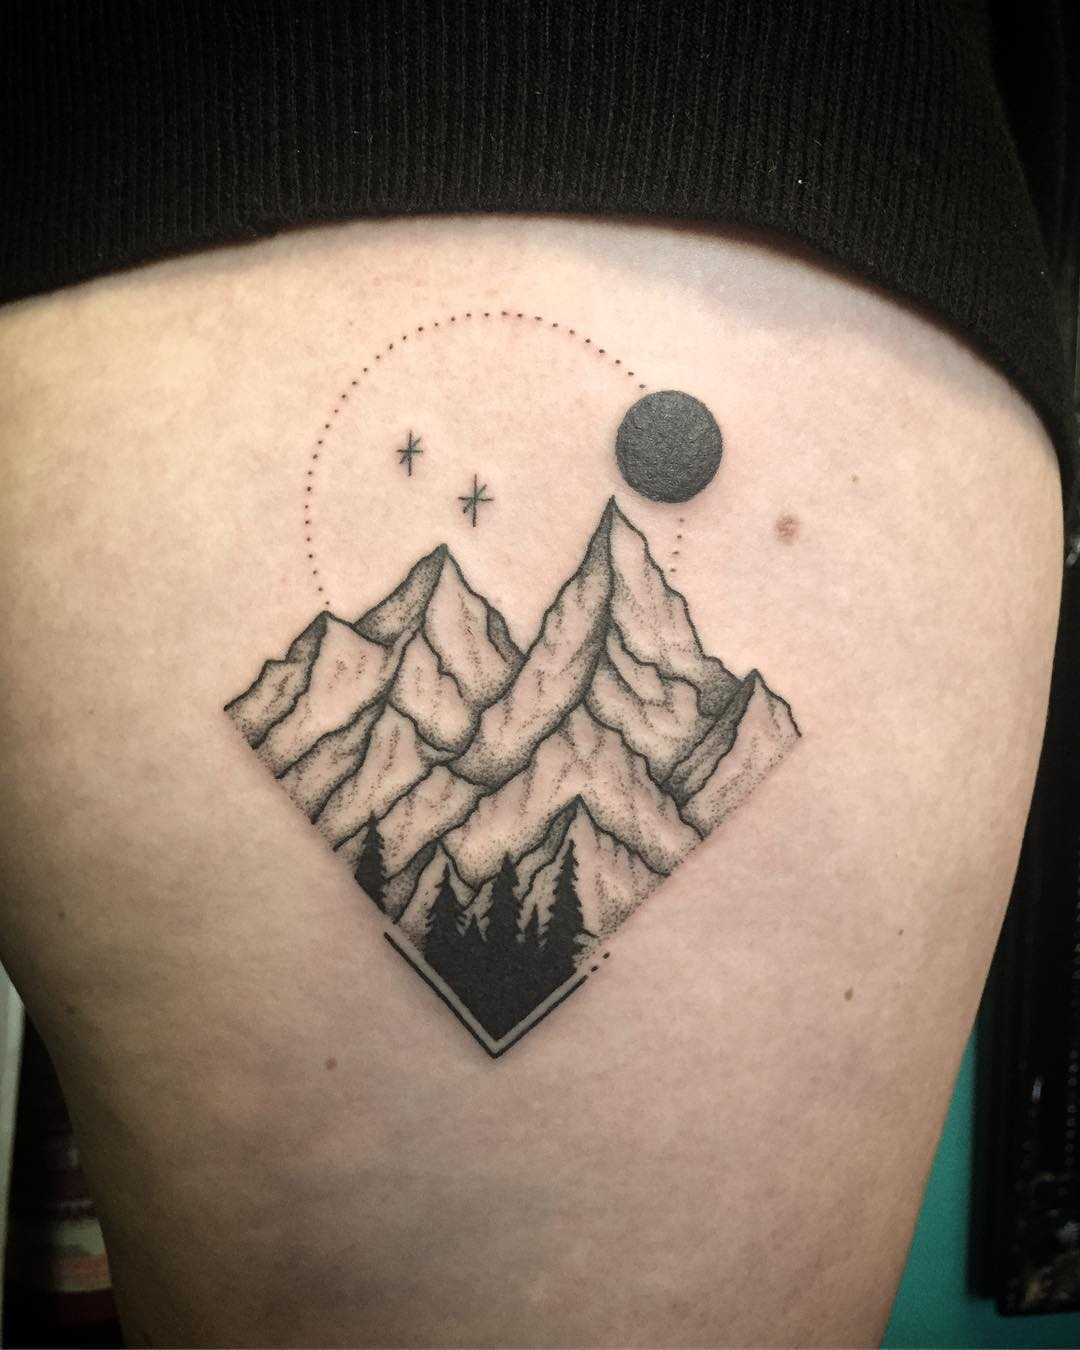 Hand-poked mountain scene by Kirk Budden